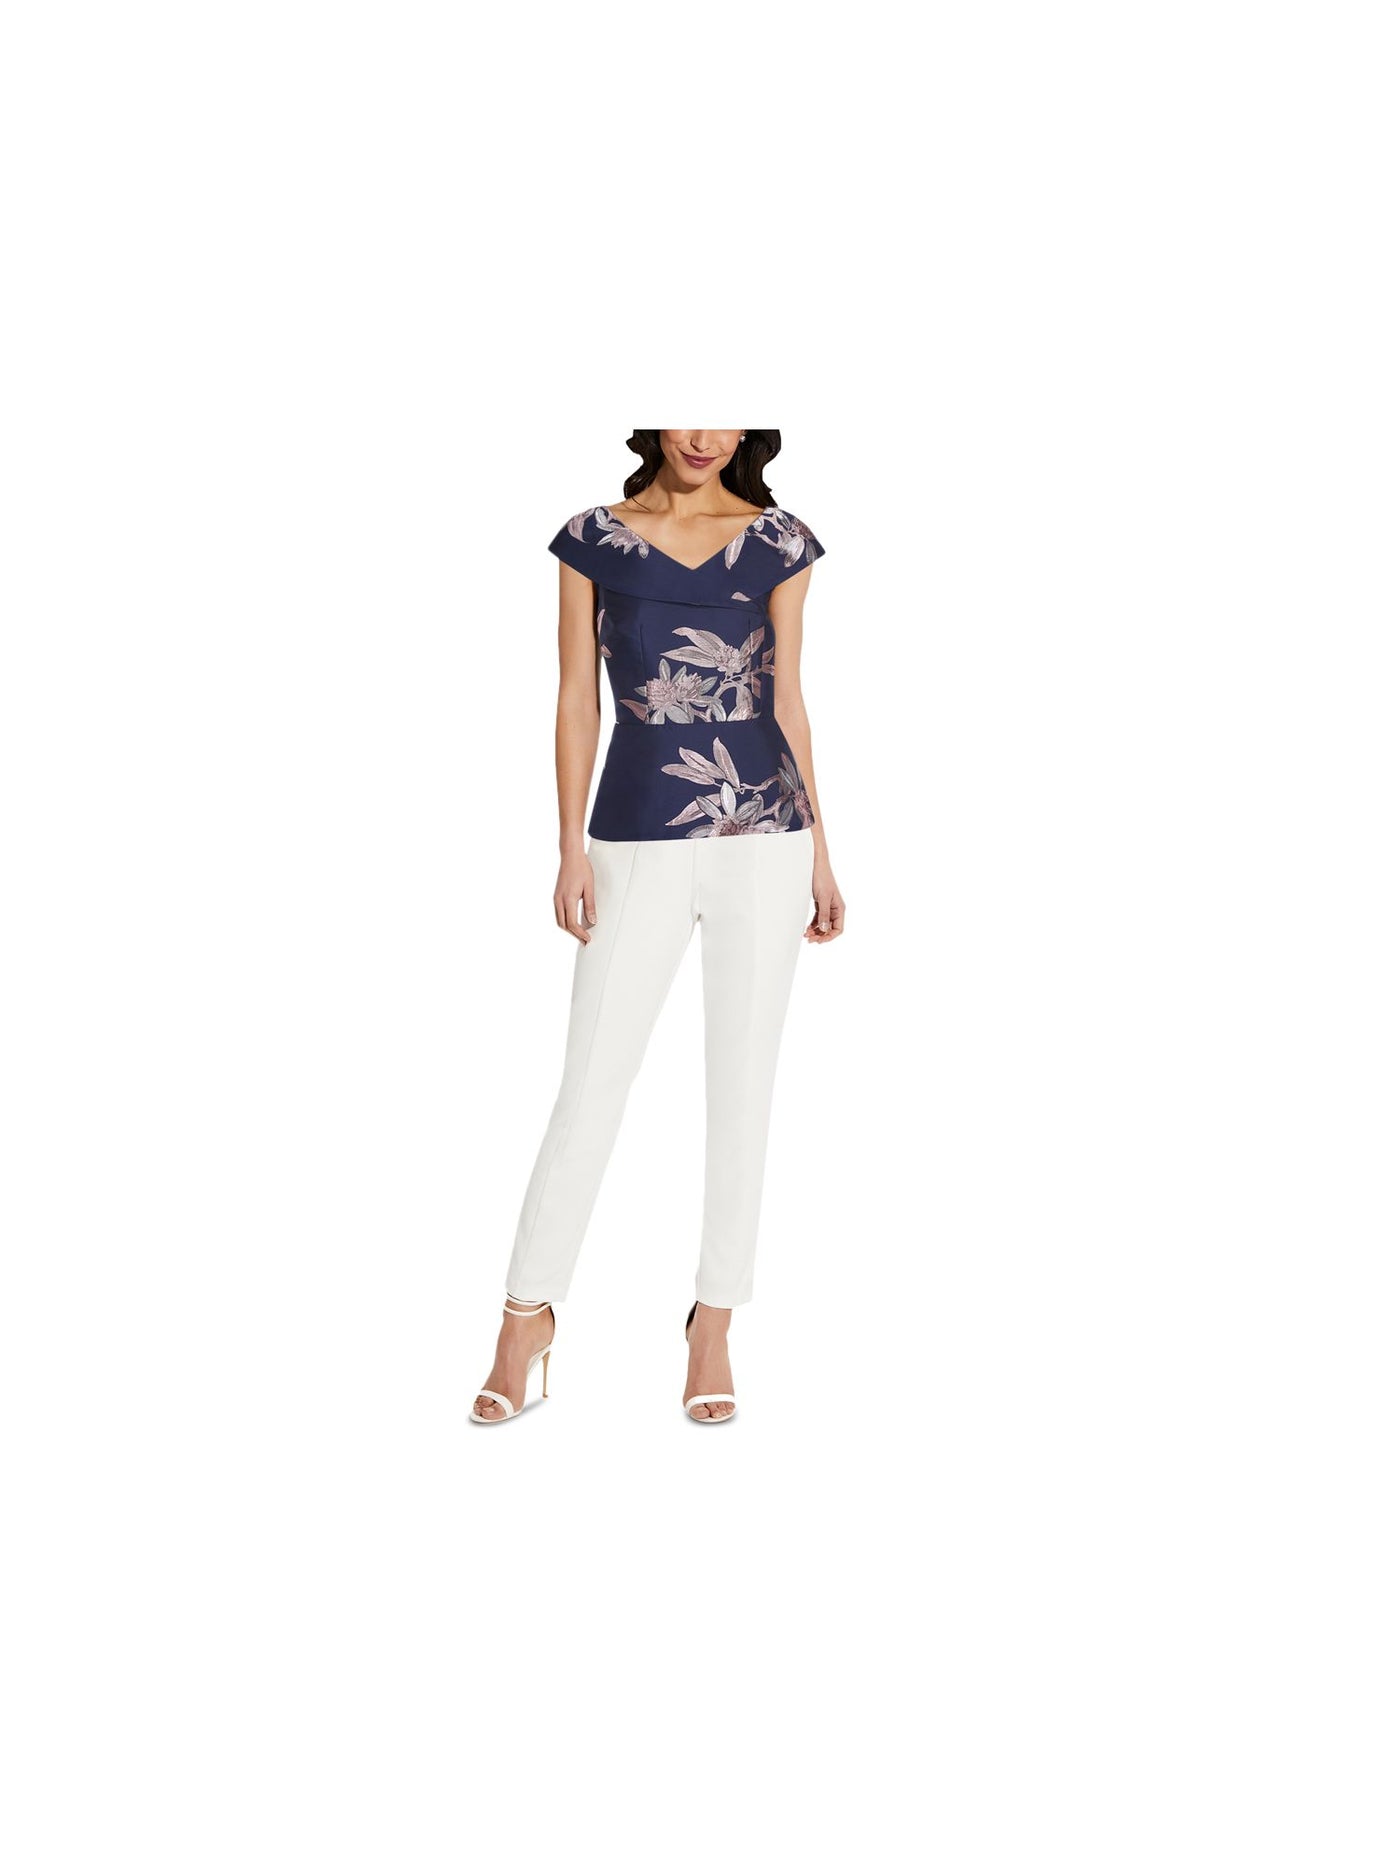 ADRIANNA PAPELL Womens Navy Zippered Darted Floral Flutter Sleeve V Neck Party Peplum Top 6